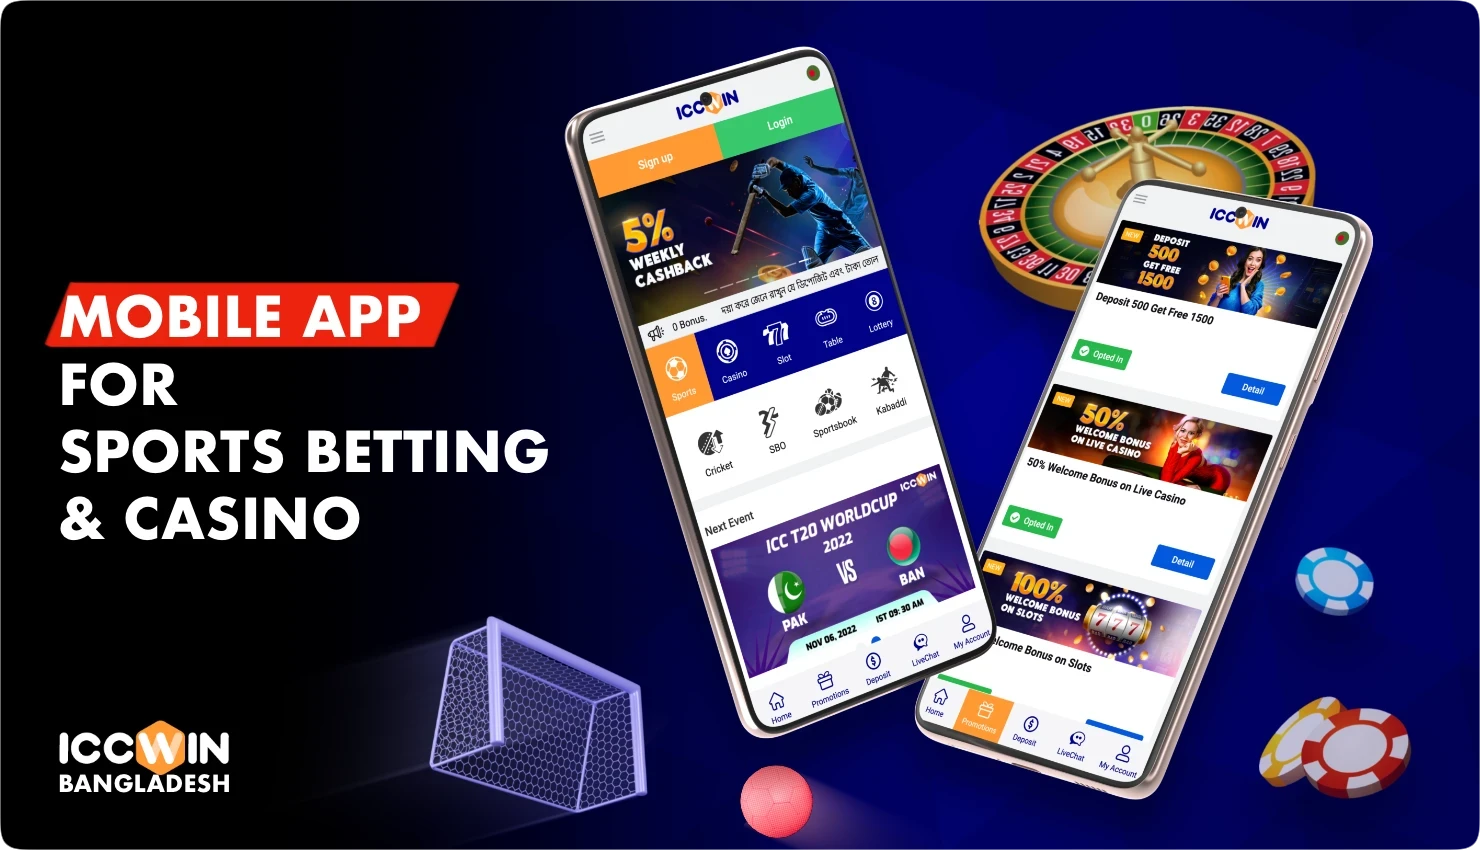 Download the free Iccwin app for Android for legal sports and casino betting in Bangladesh